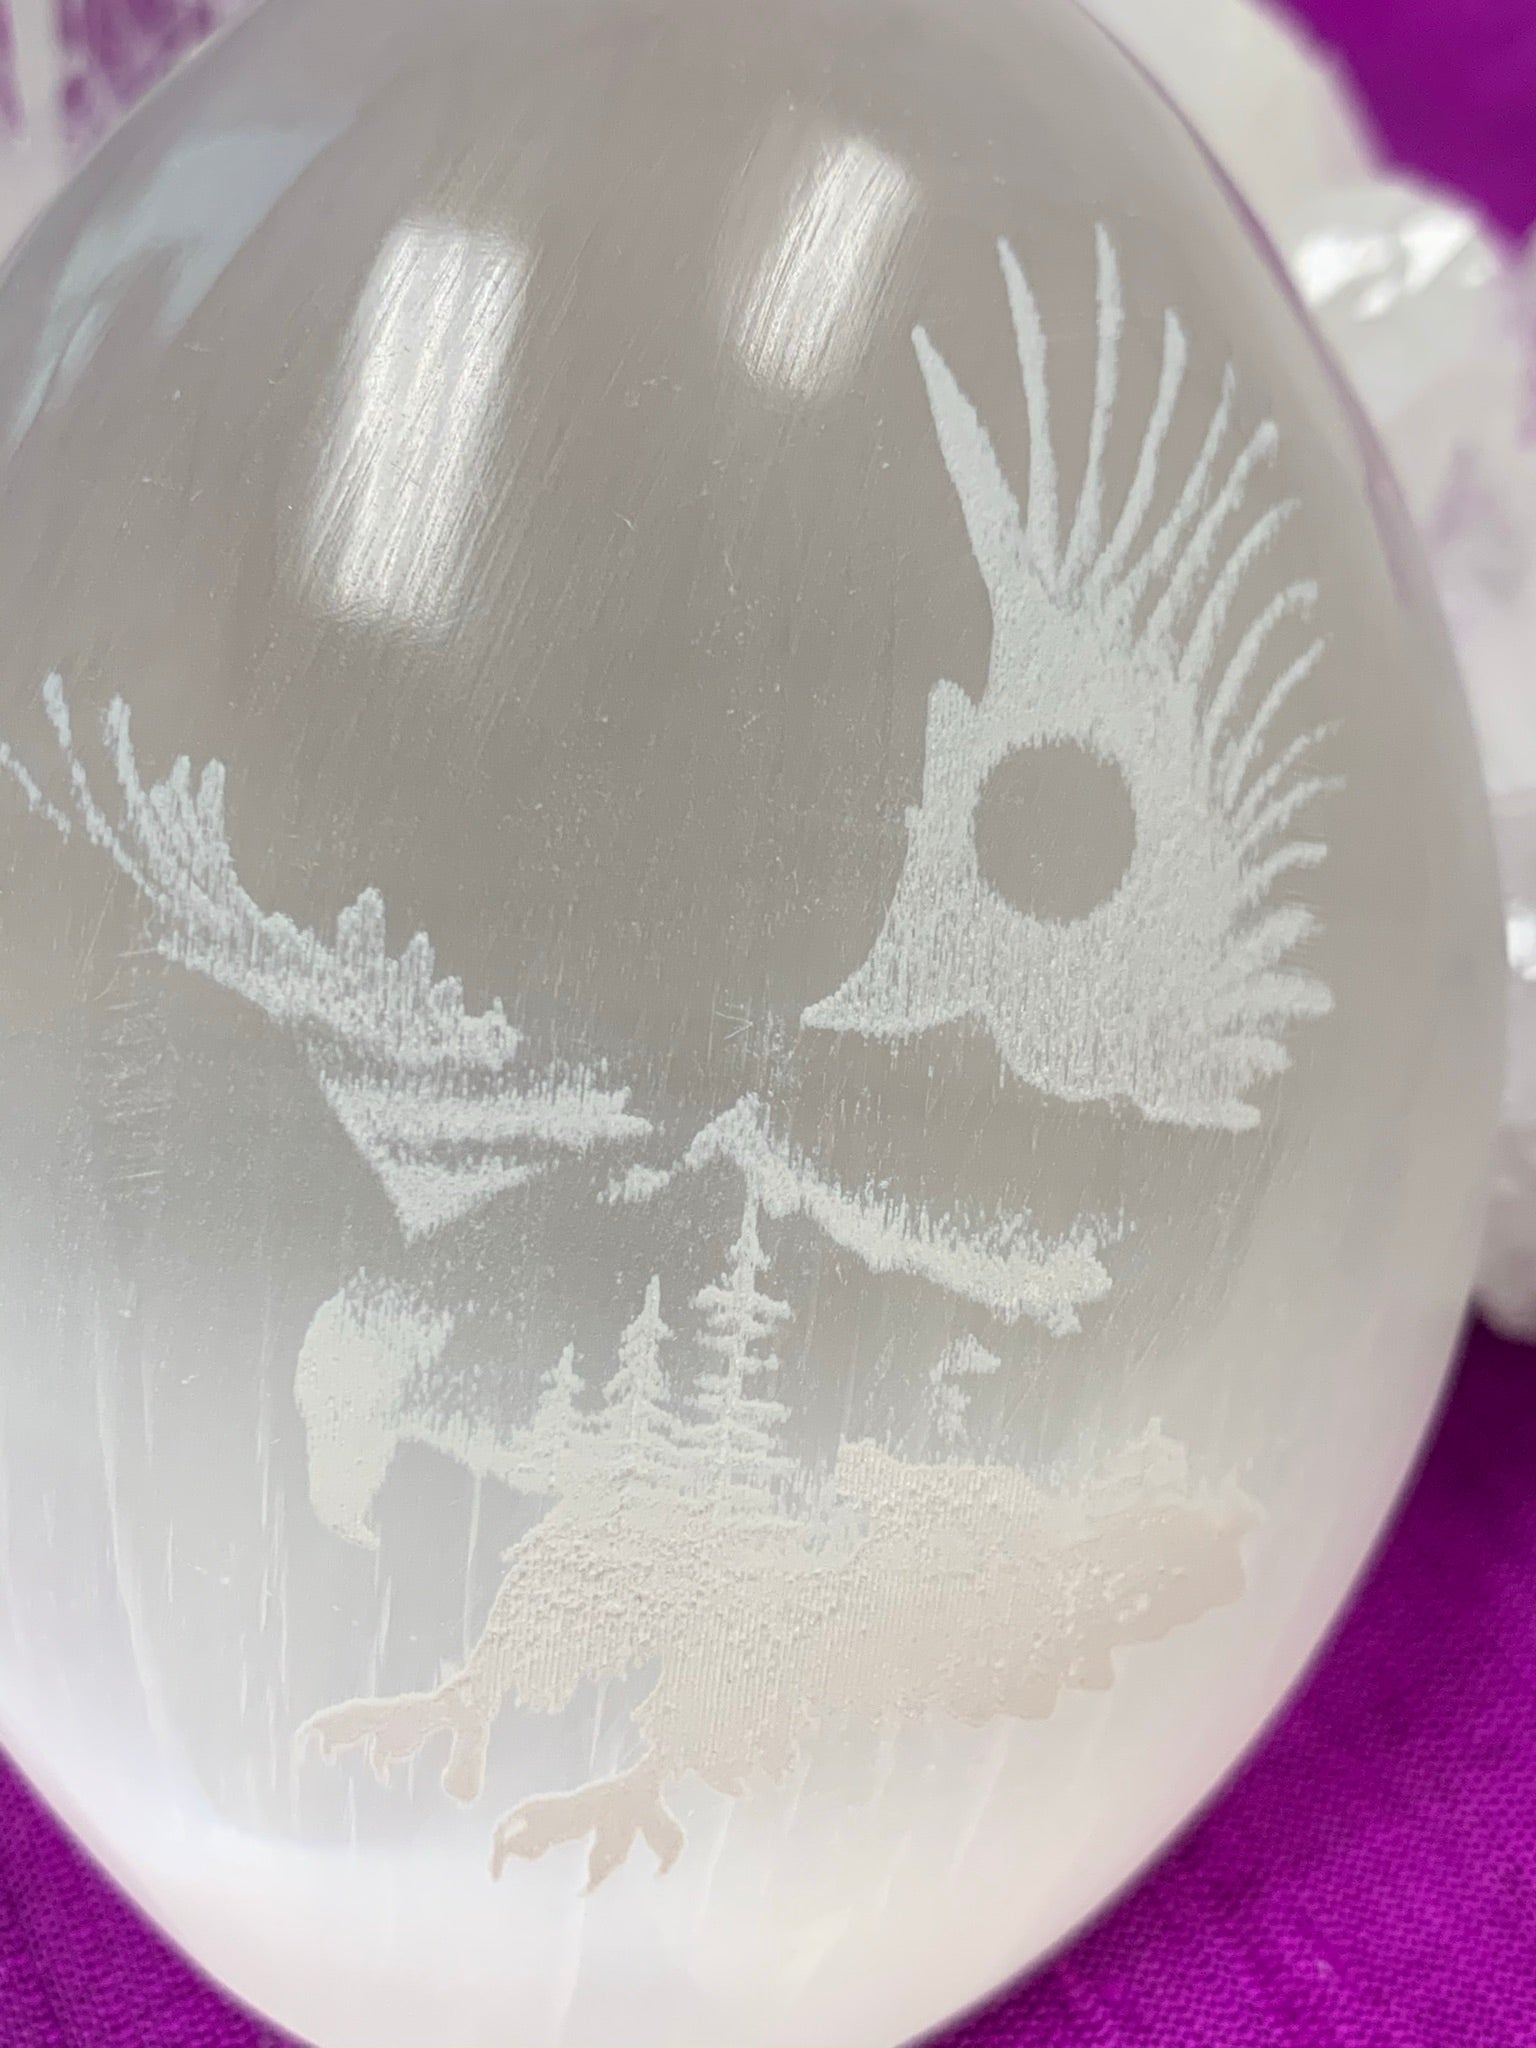 Close-up of the eagle etched on white selenite palm stone. Selenite can range from translucent to milky white. Eagle is joined with the earth in this etching where the trees are a part of its body and the sun, a part of its wings. Average weight of these palm stones is 4.2 oz and they are approximately 3"x2.5", the perfect size to hold in the palm of your hand. These selenite stones are ethically sourced and workers are paid living wages.